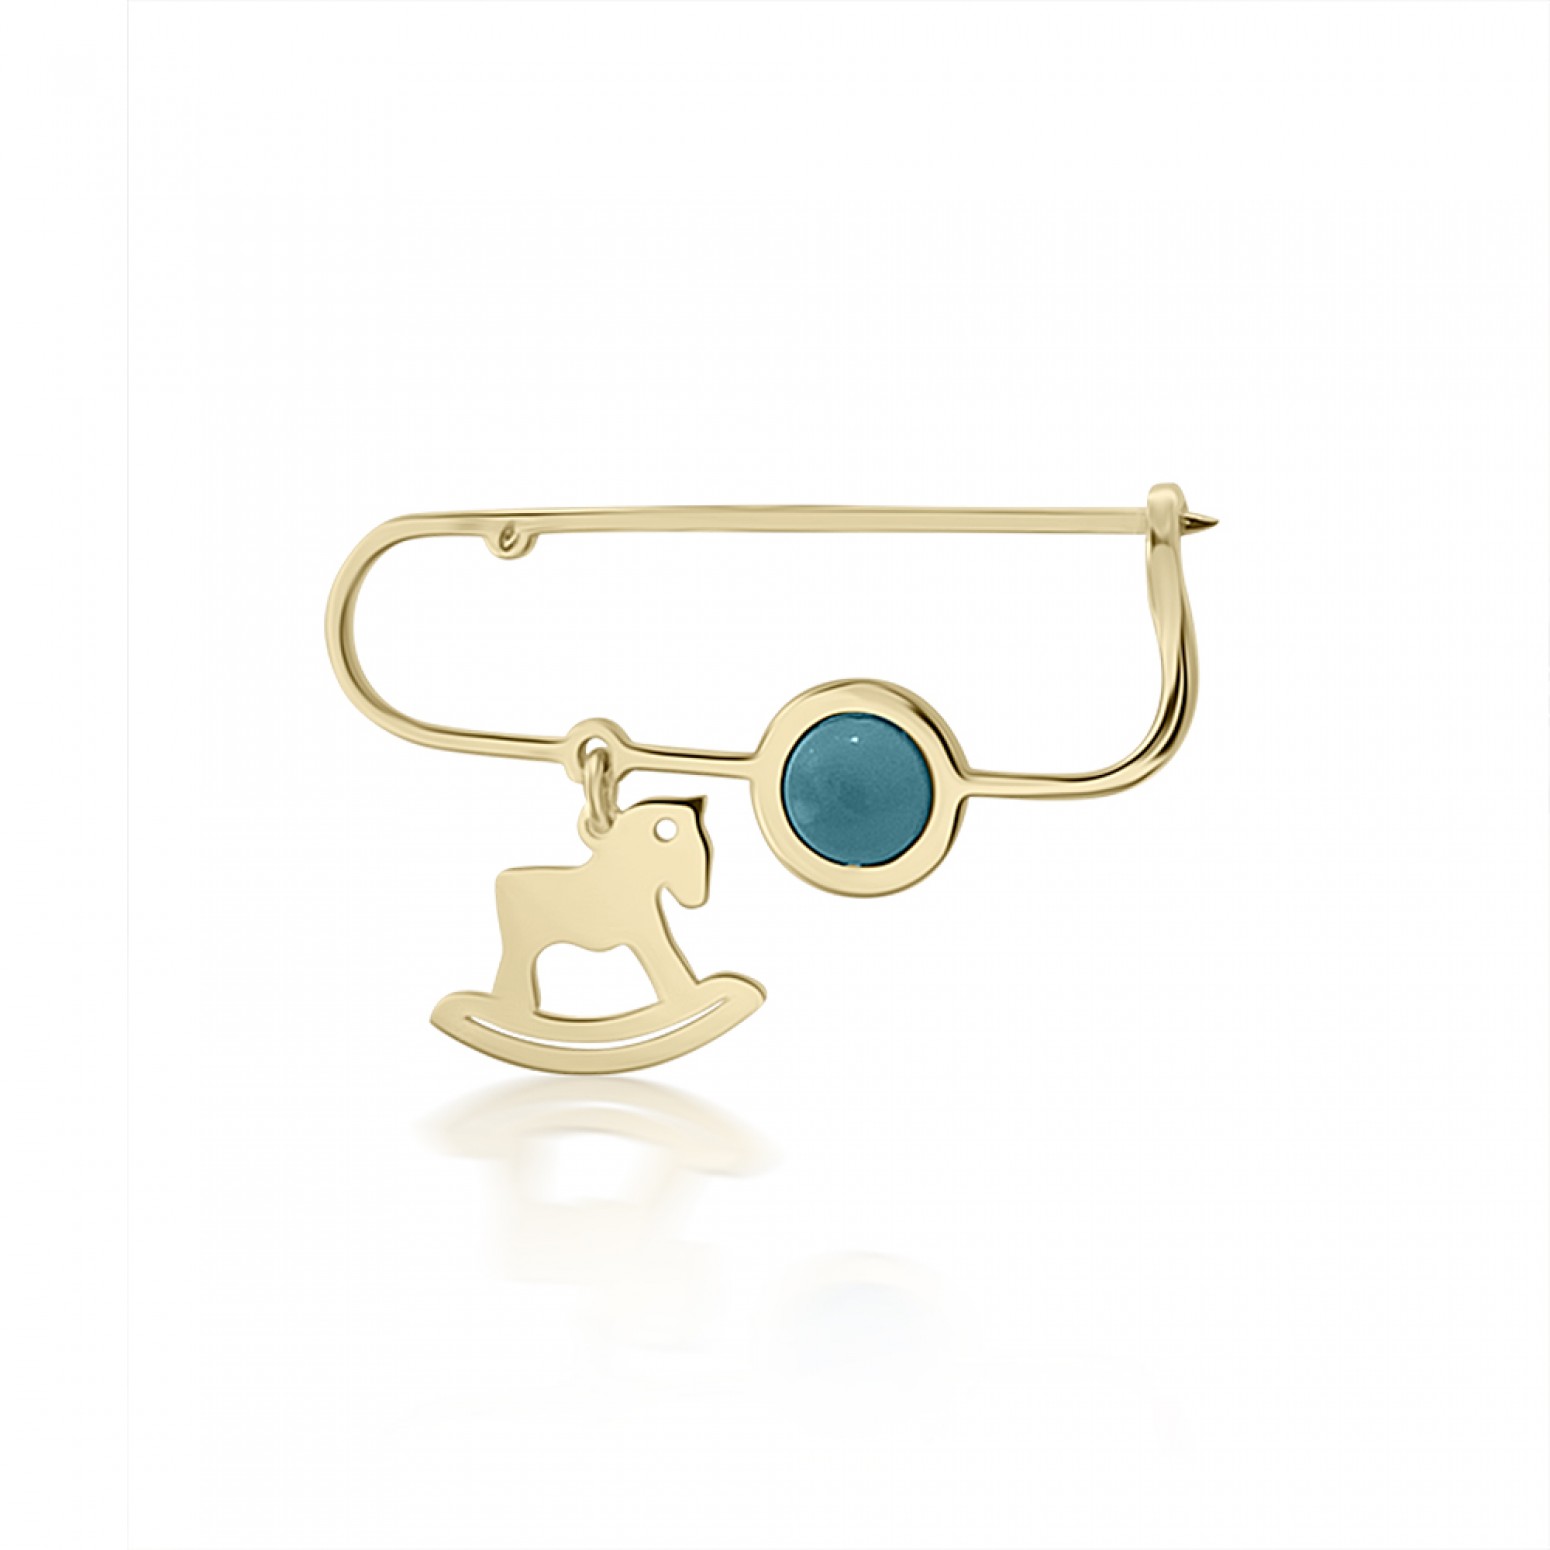 Babies pin K14 gold with horse and turquoise pf0132 BABIES Κοσμηματα - chrilia.gr